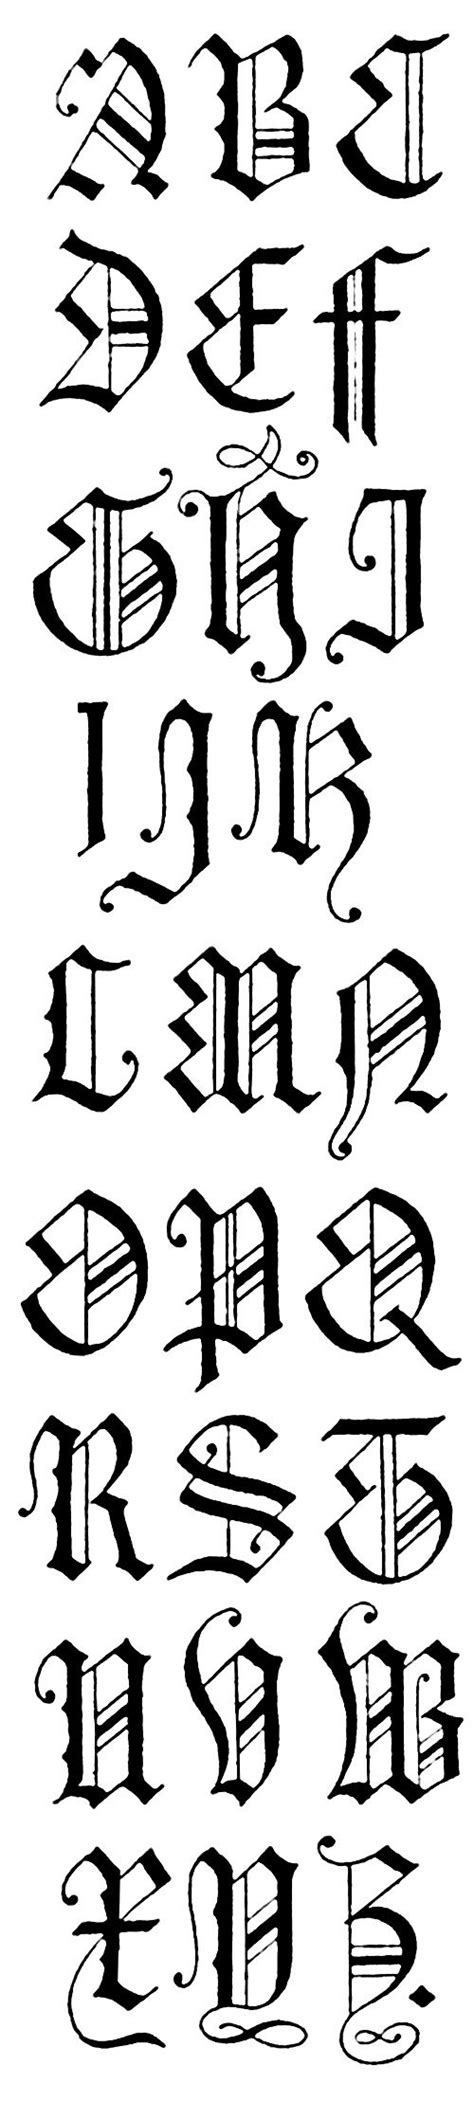 Gothic Lettering English Gothic Letters 15th Century Calligraphy